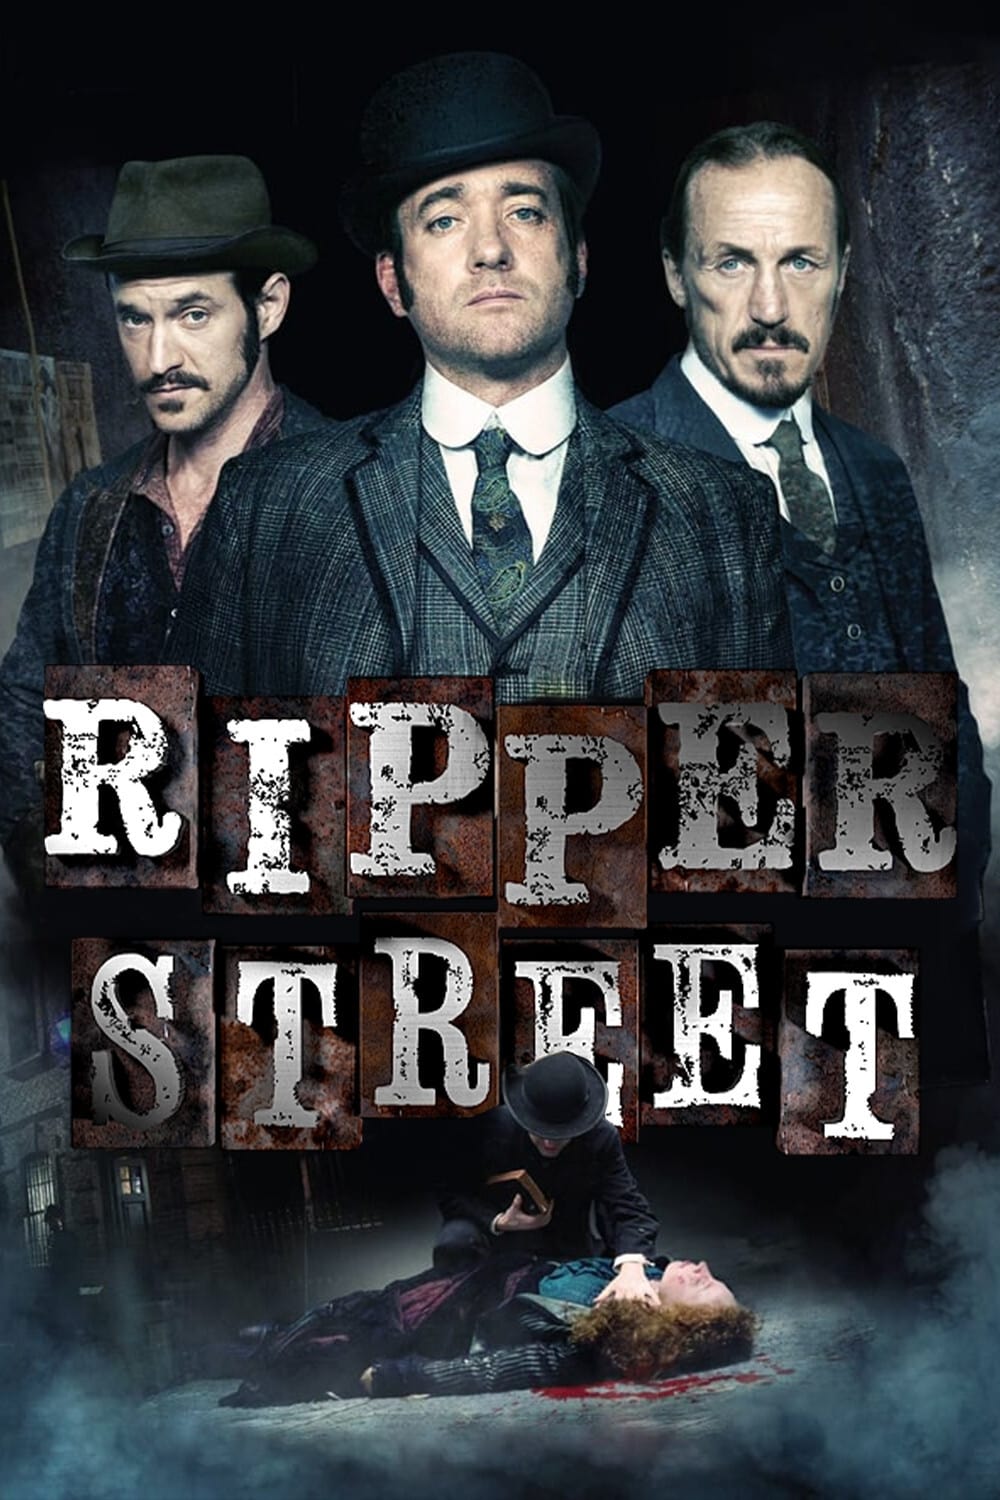 Ripper Street TV Shows About Victorian England